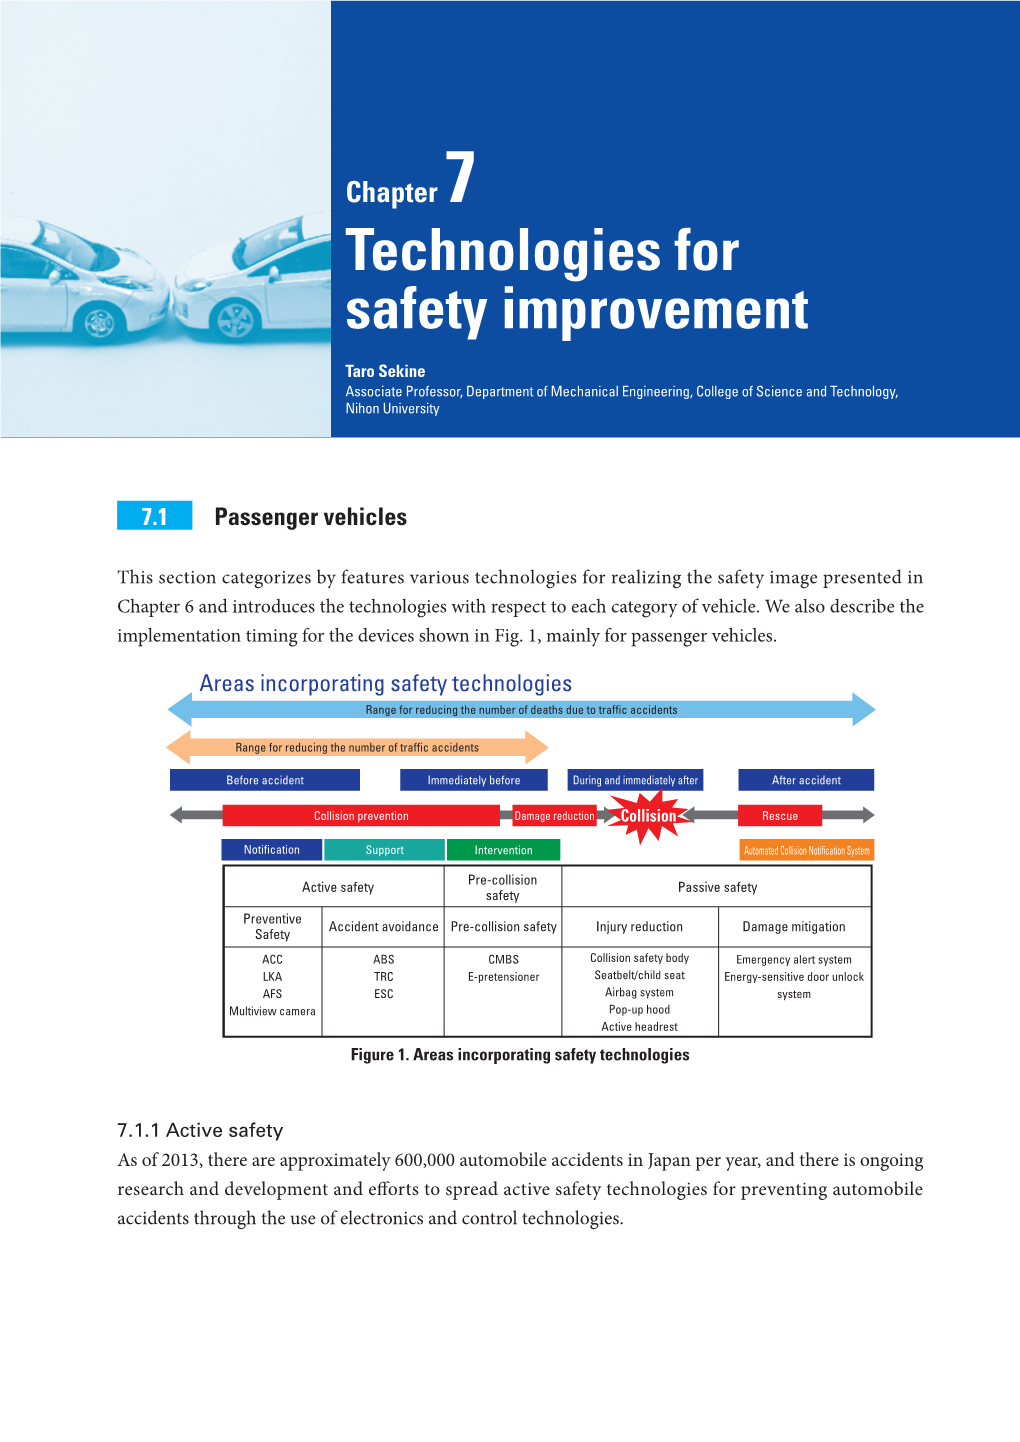 Technologies for Safety Improvement